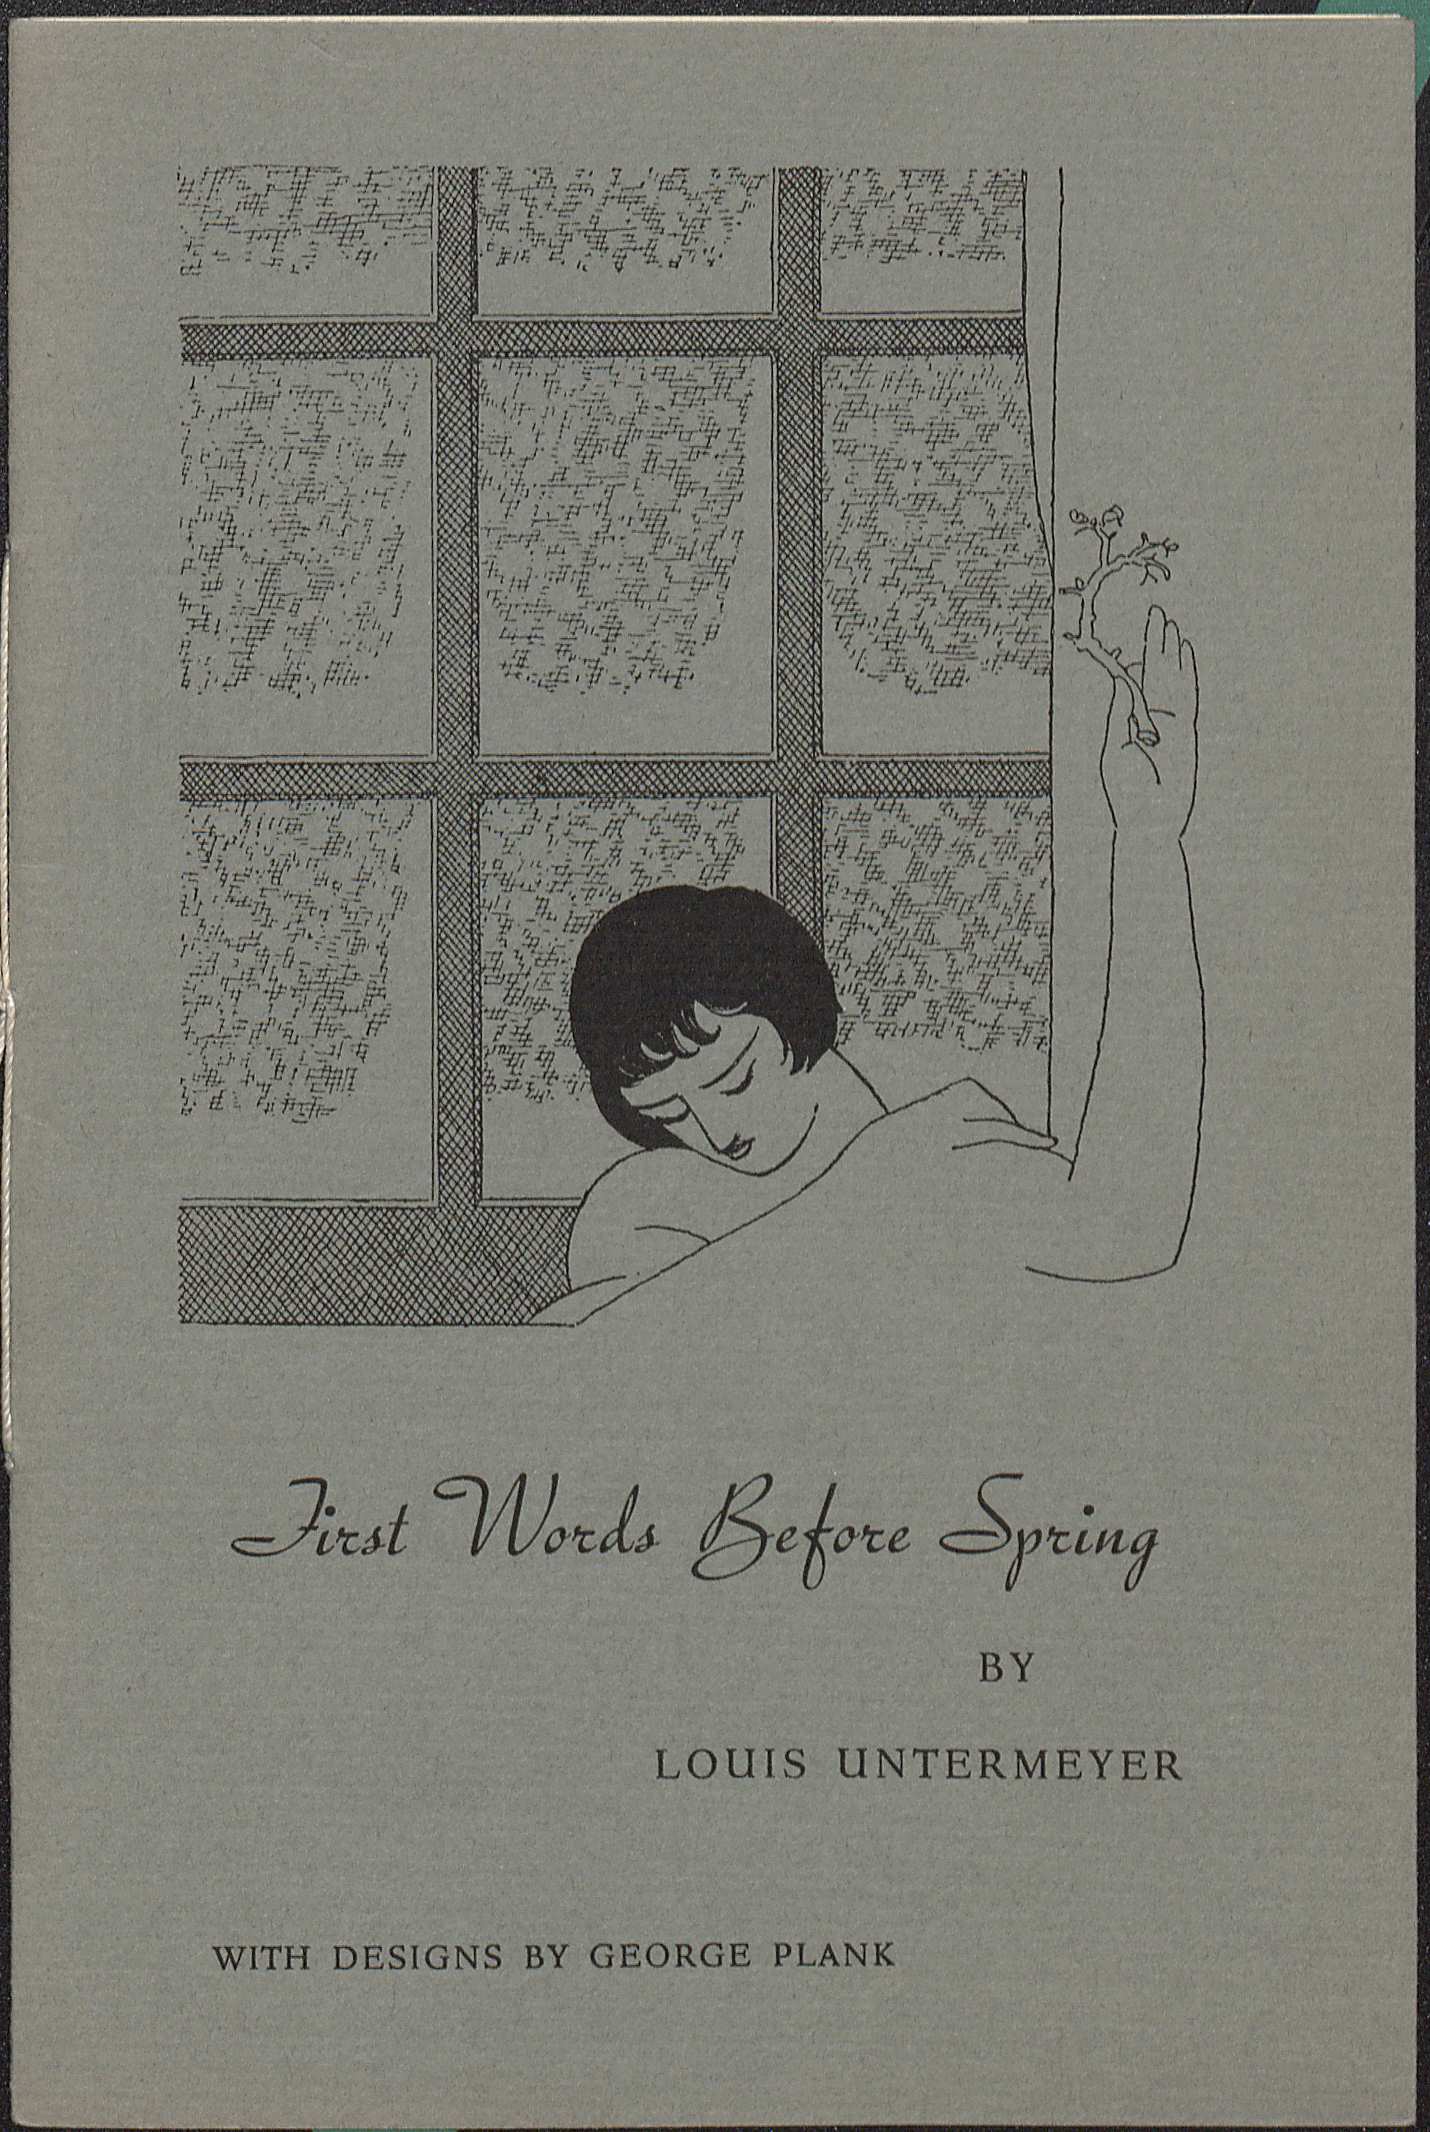 Shown here is a 1933 chapbook printing of First Words Before Spring. (PS3541 .N72 F54 1933. Clifton Waller Barrett Library of American Literature. Image by Petrina Jackson.)